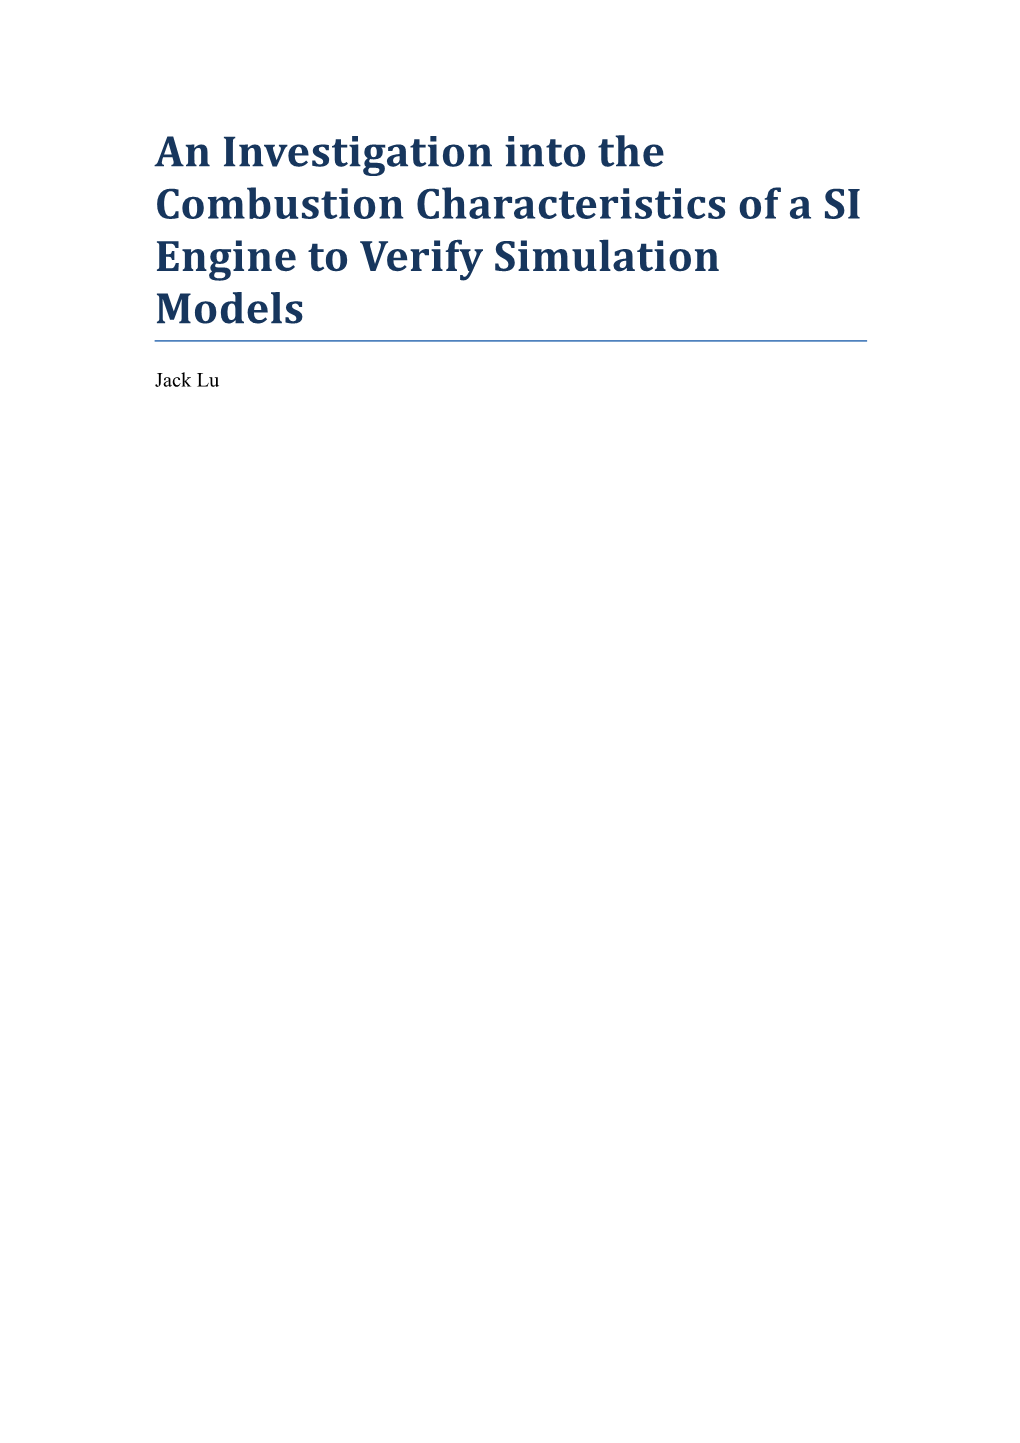 An Investigation Into the Combustion Characteristics of a SI Engine to Optimise Engine